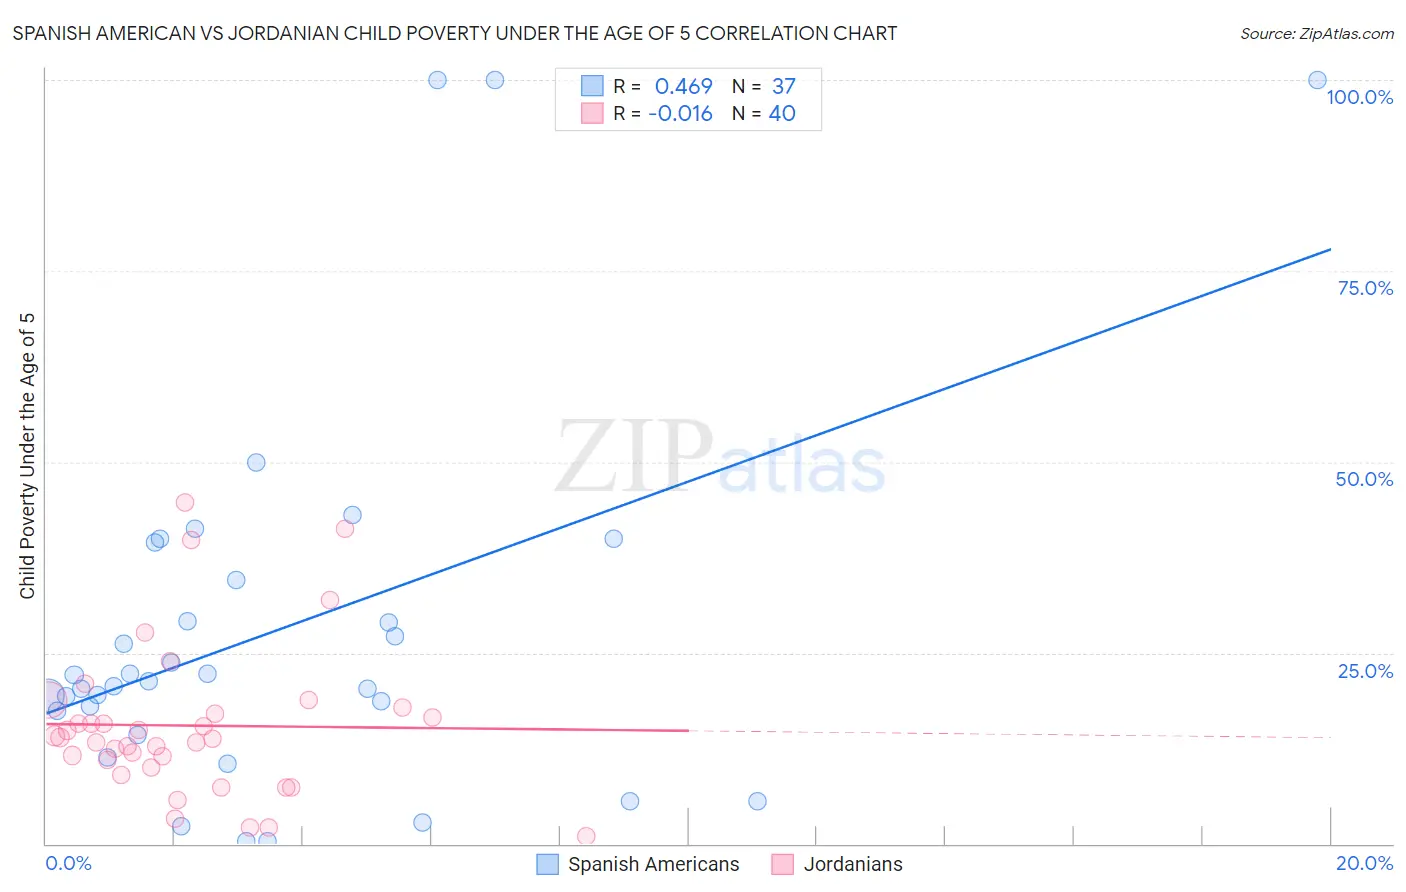 Spanish American vs Jordanian Child Poverty Under the Age of 5